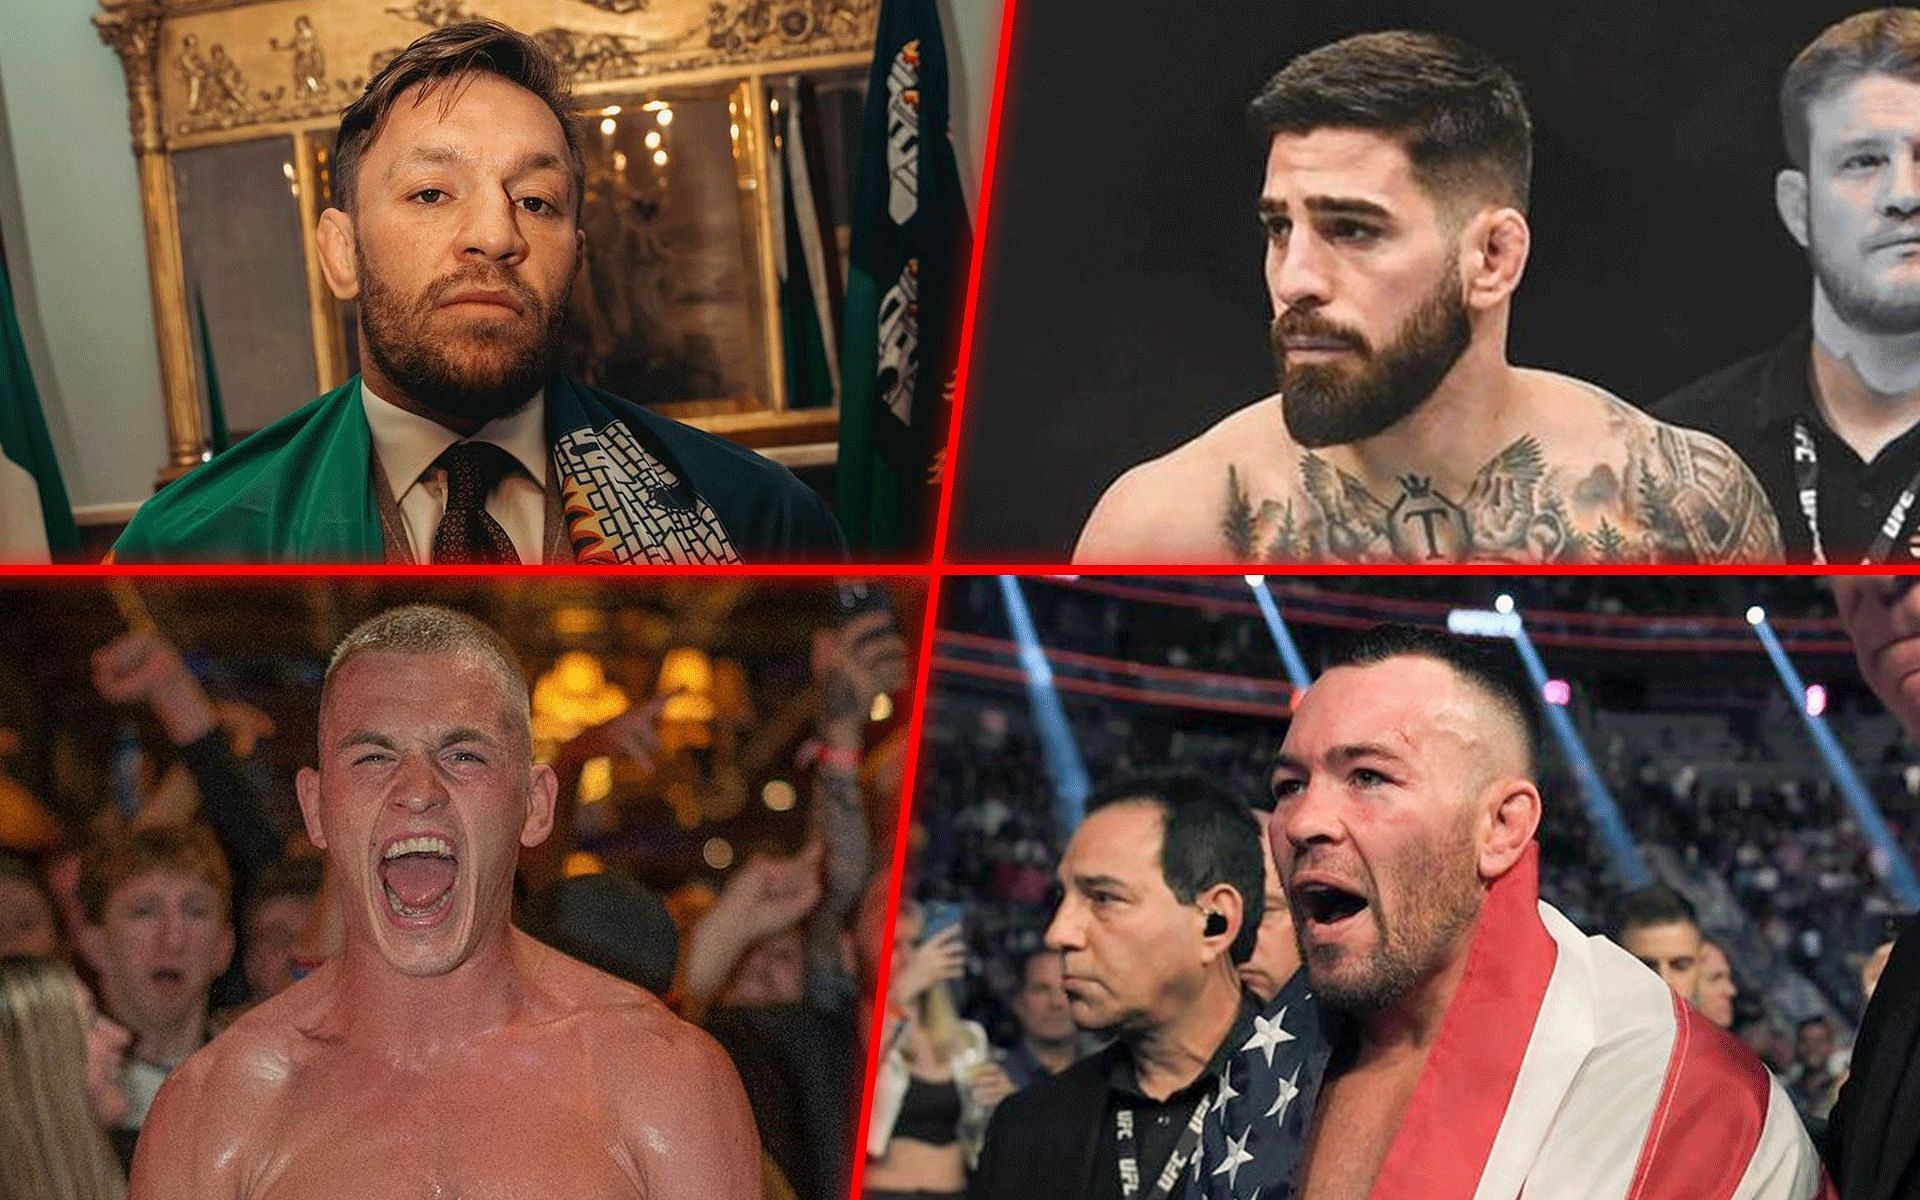 Clockwise from top left - Conor McGregor called out by Ilia Topuria, Colby Covington is Ian Garry